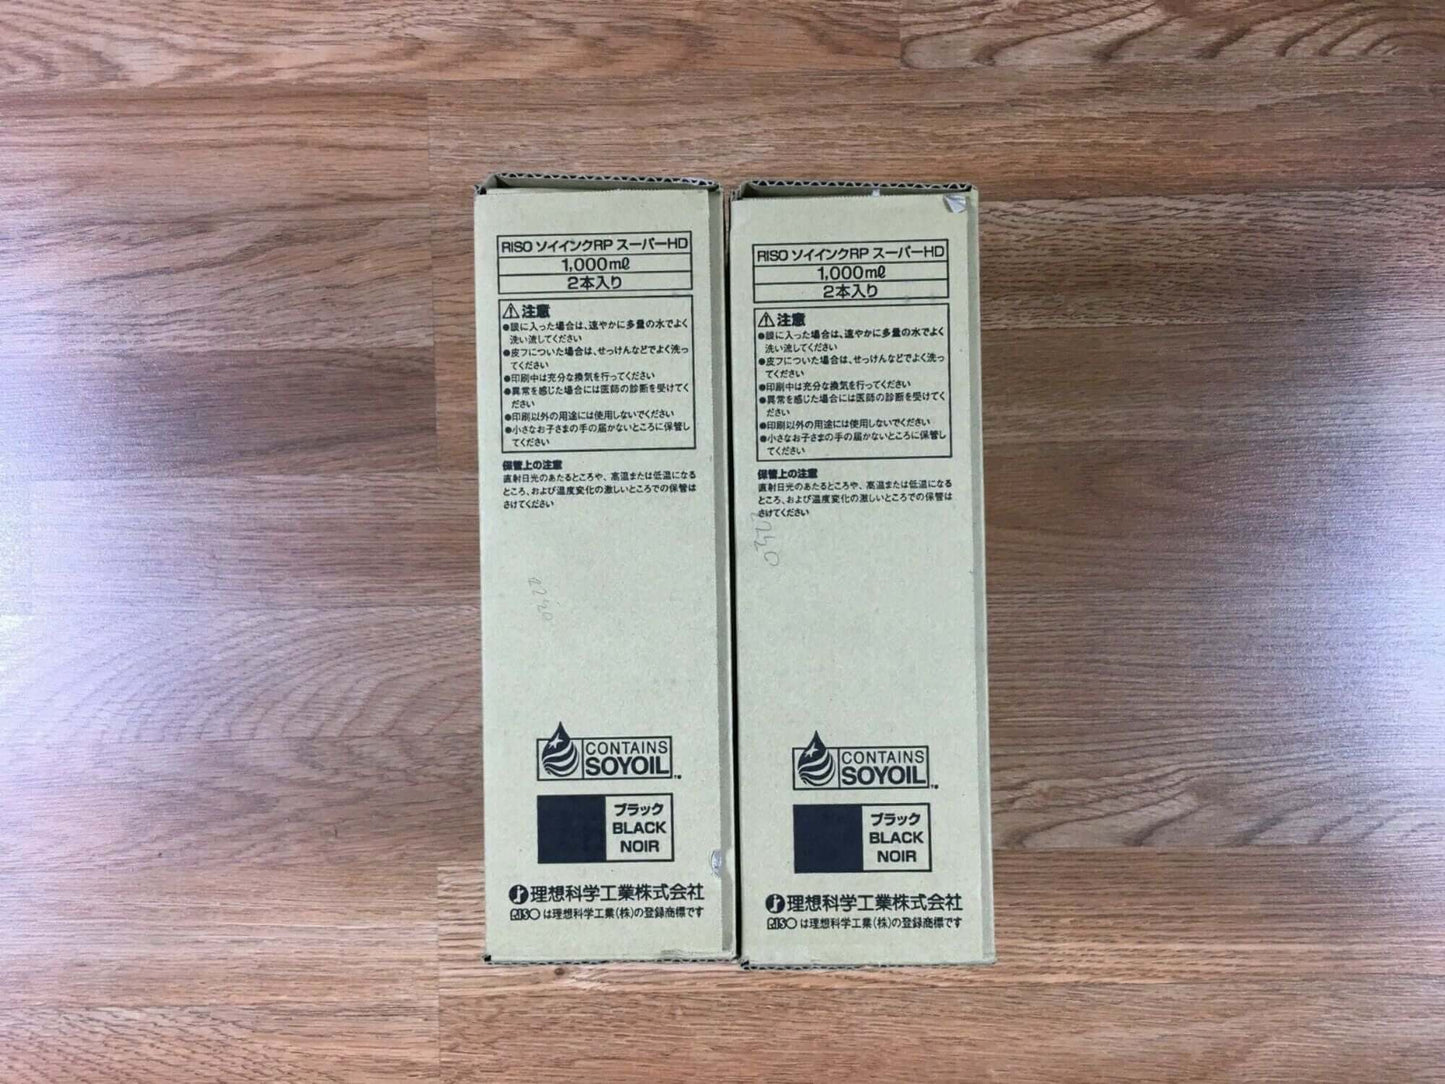 Lot Of 2 Genuine Riso S-4386 Super-HD Soy Ink For RP3700 And RP3790 - copier-clearance-center